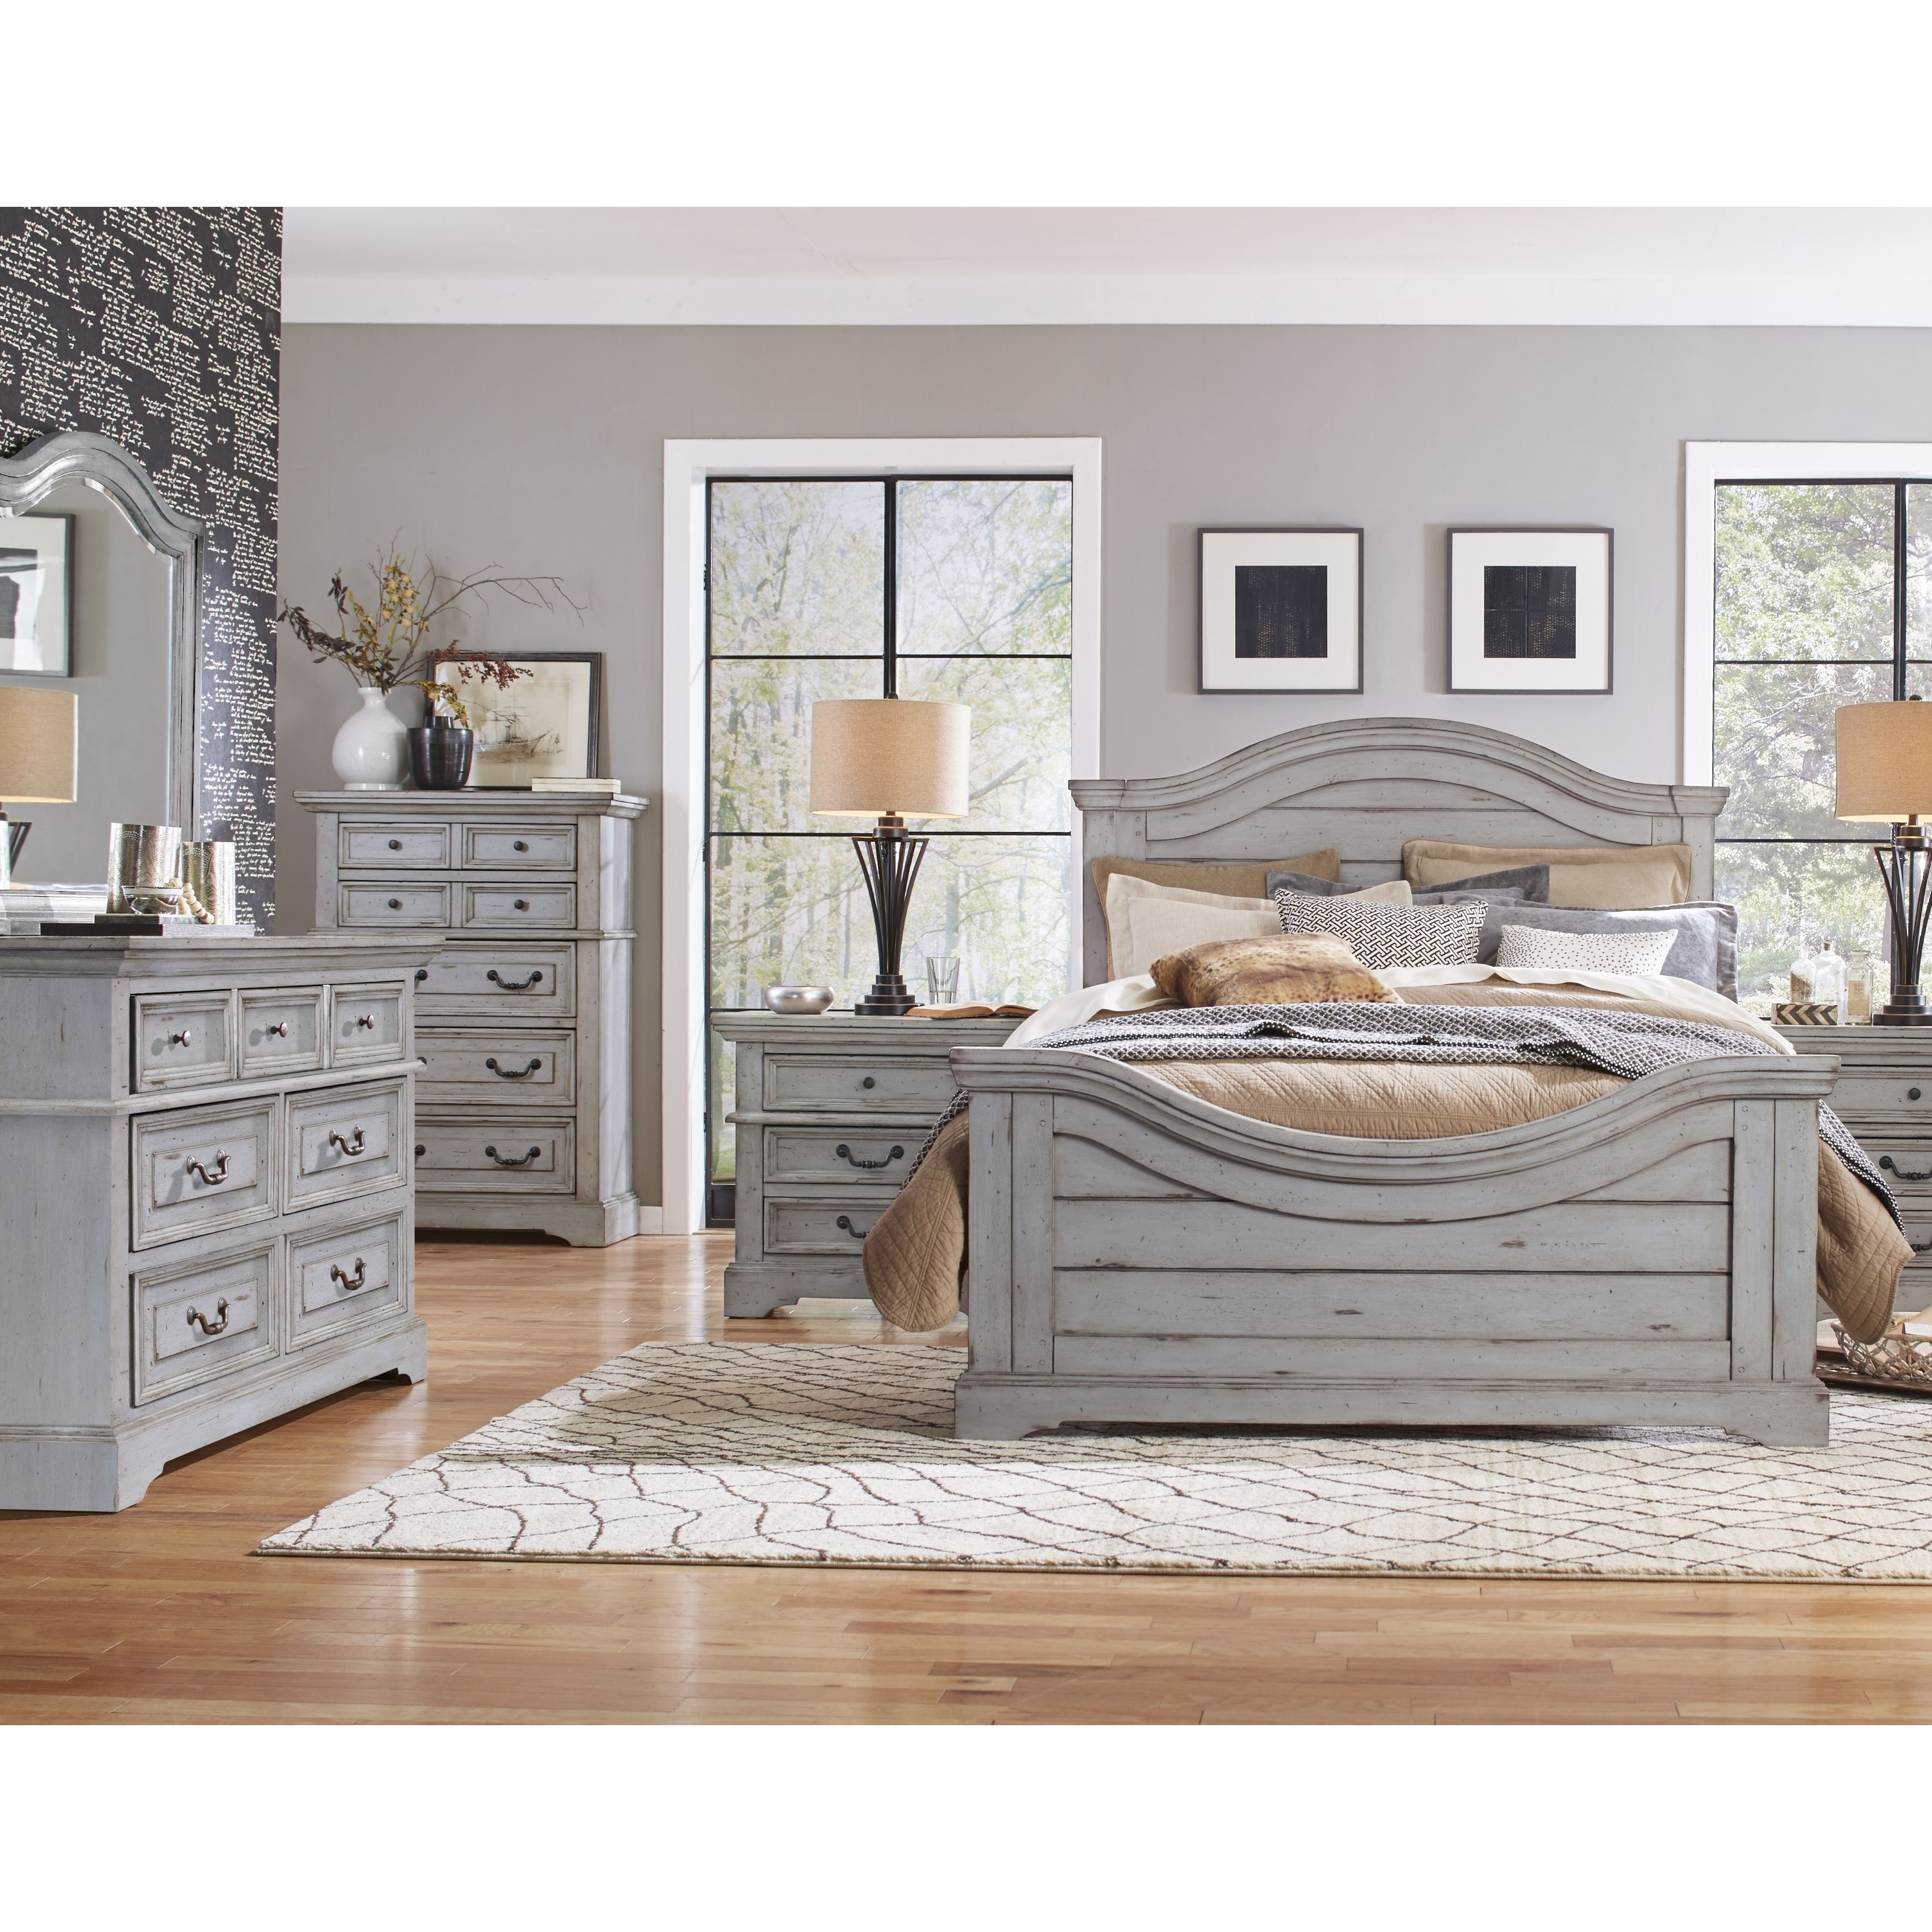 Greyson Living Lakewood Panel 5 Piece Bedroom Set Lakewood Grey with dimensions 3400 X 3400